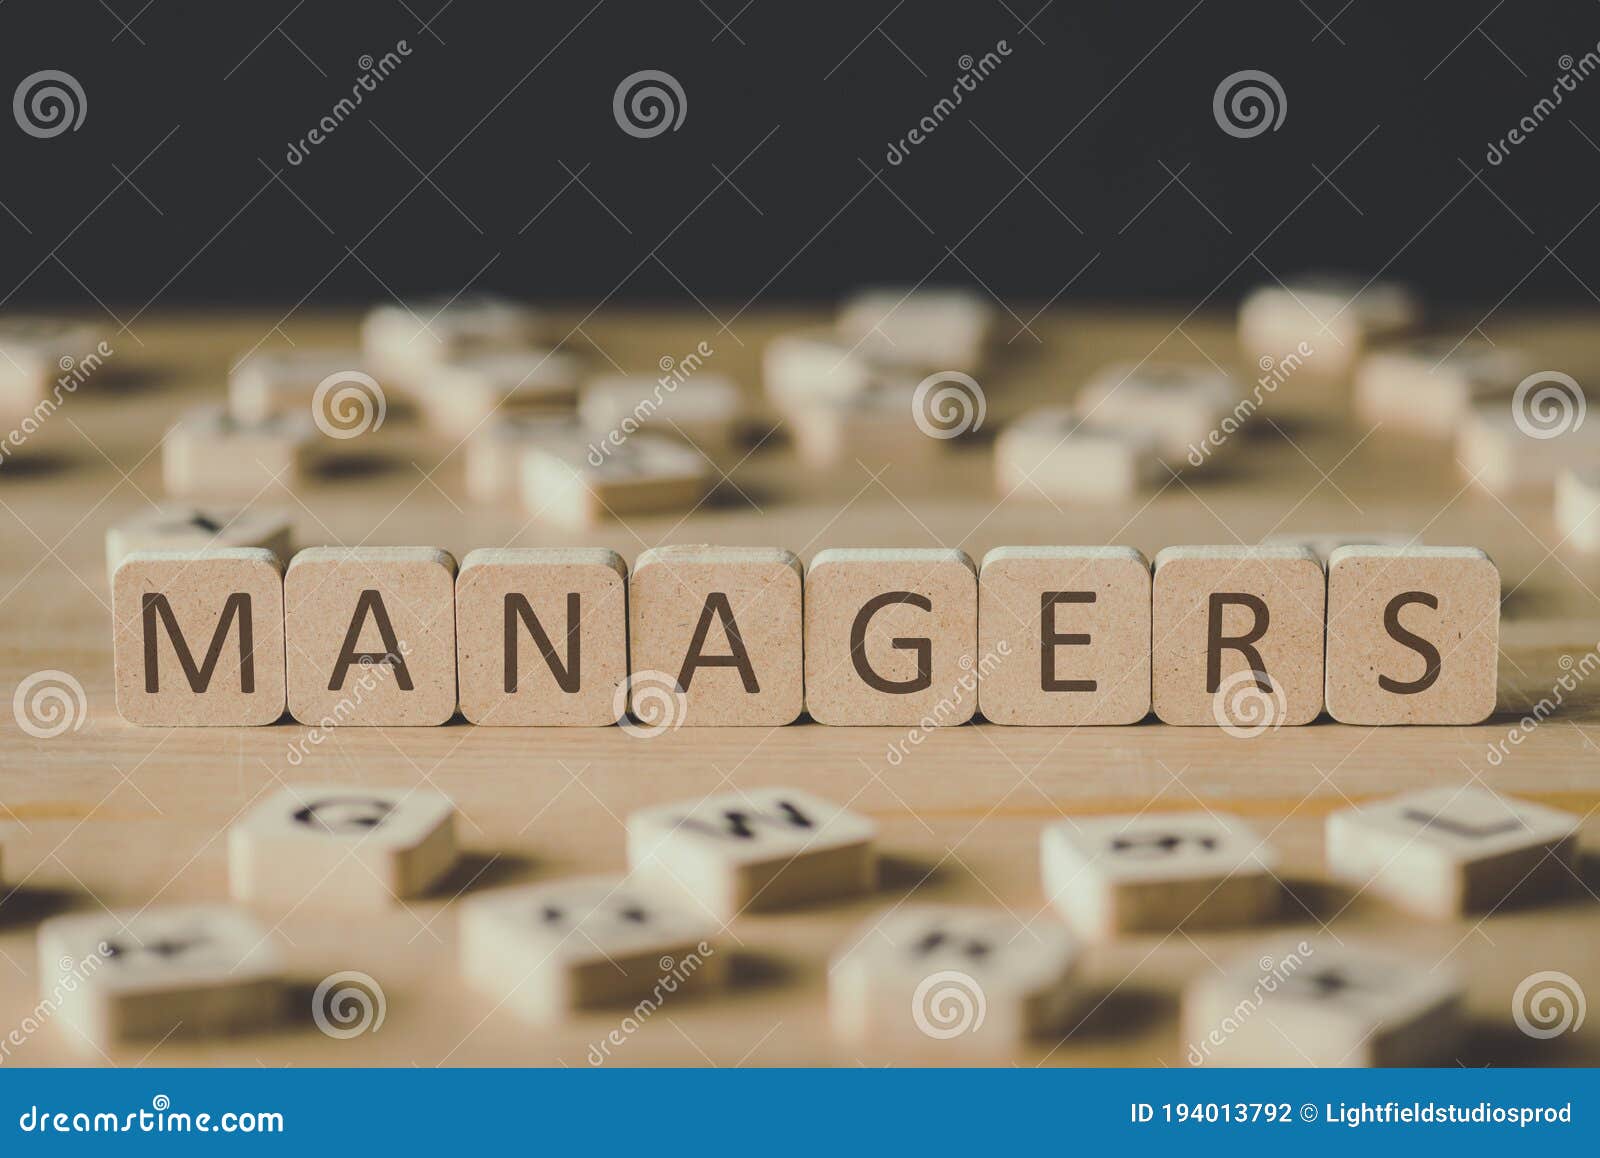 focus of managers inscription on cubes surrounded by blocks with letters on wooden surface  on black